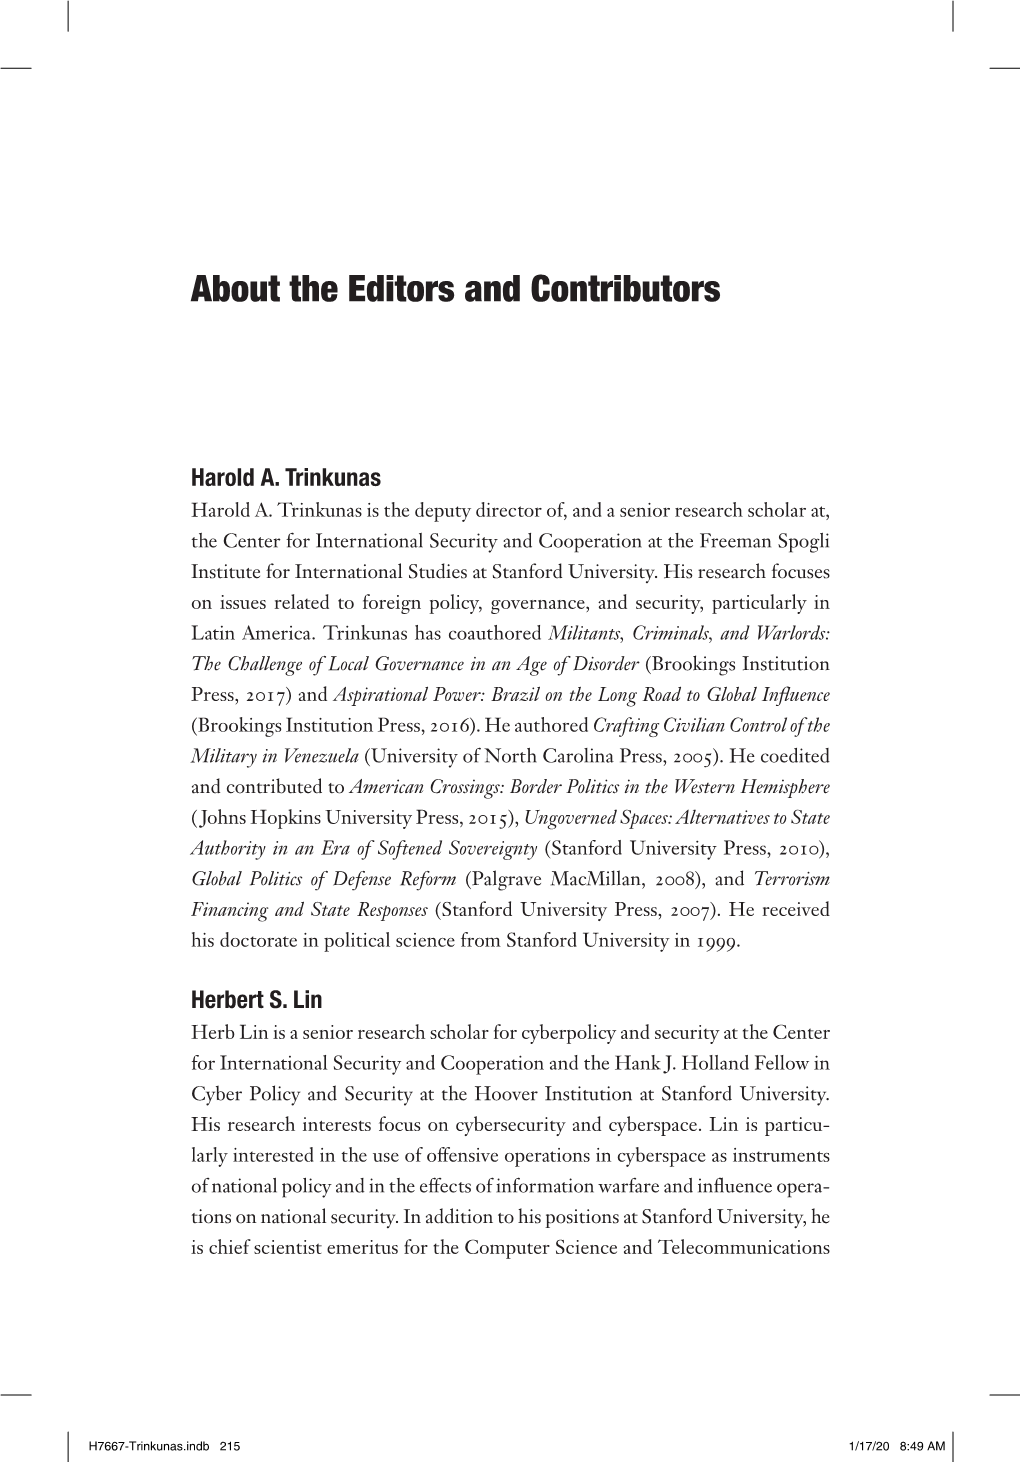 About the Editors and Contributors